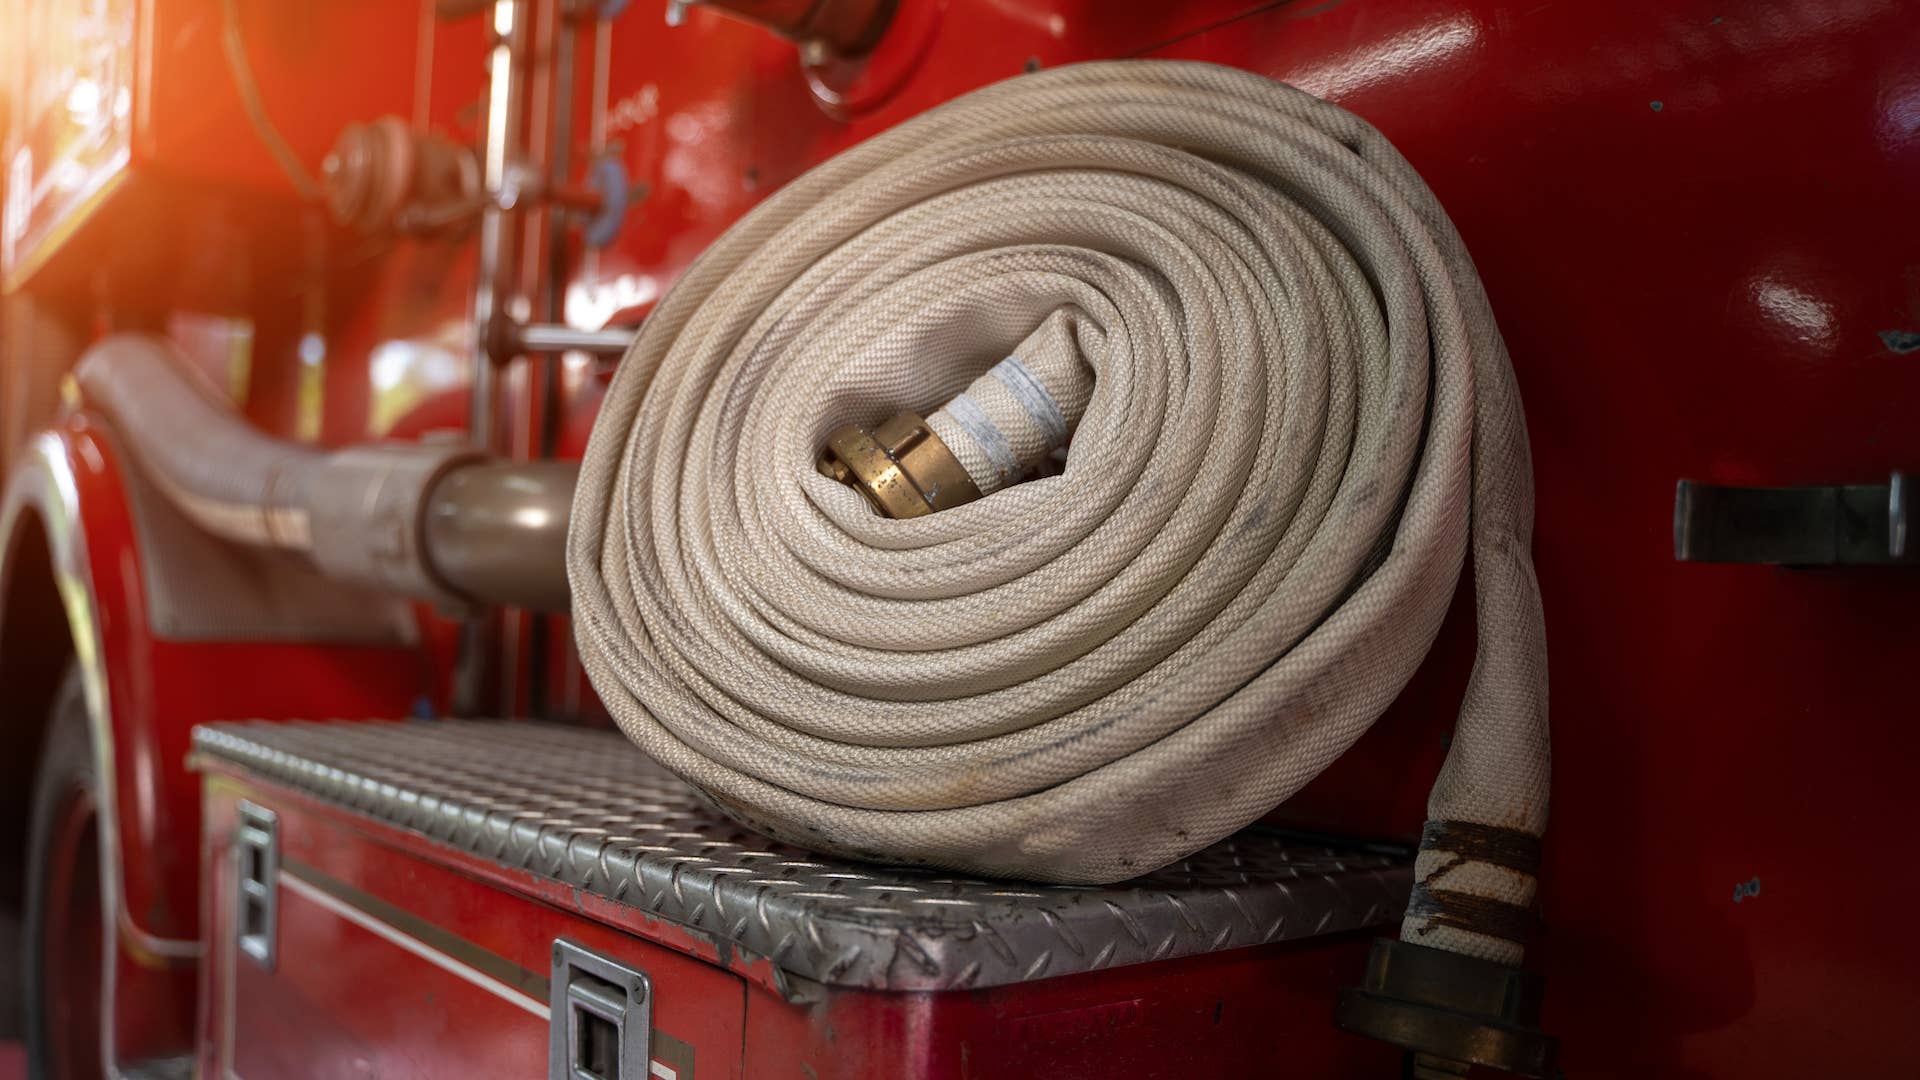 This is a picture of a Fire hose on fire truck and Firemen equipment.